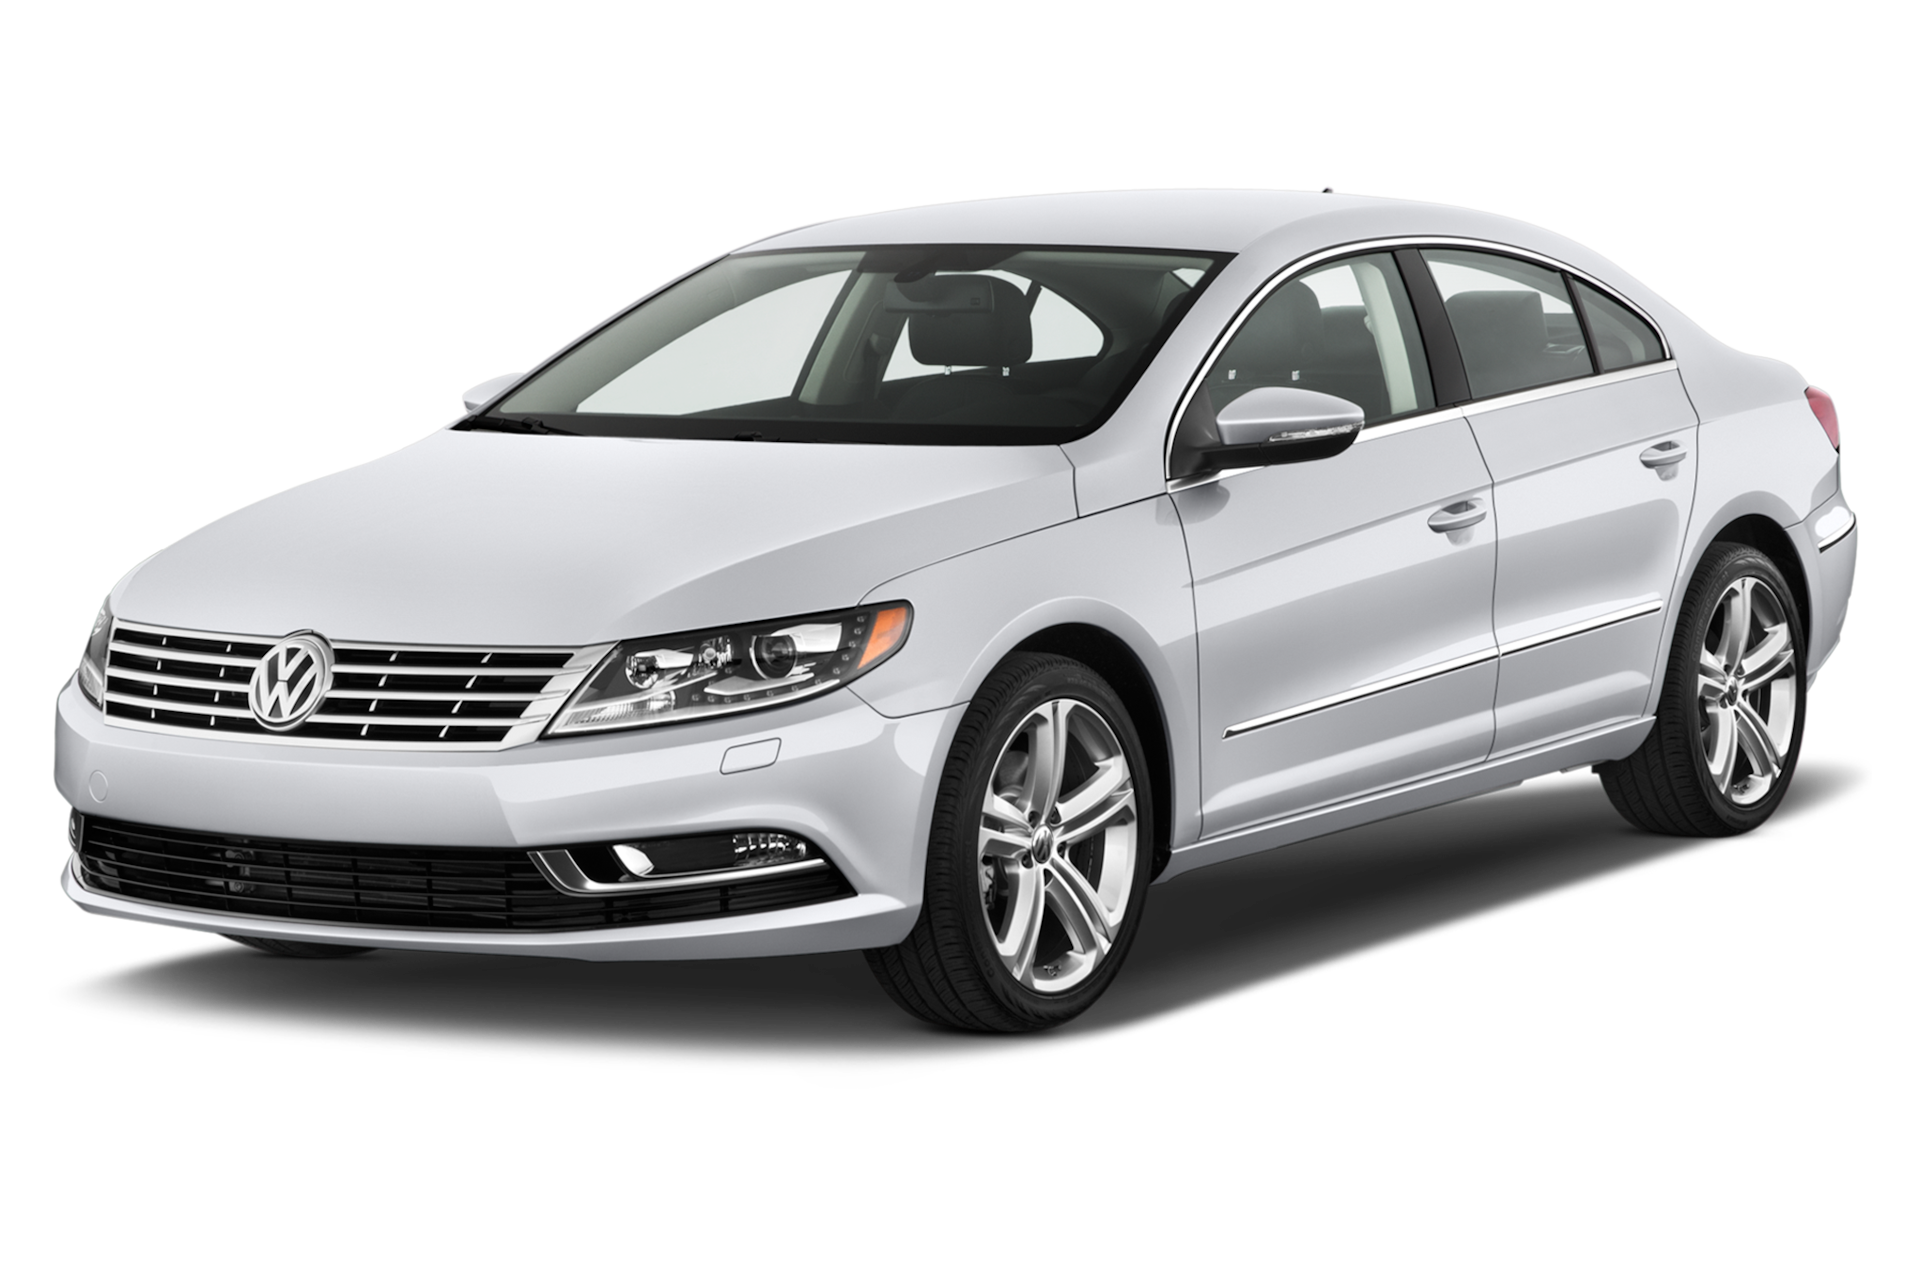 2013 Volkswagen CC Prices, Reviews, and Photos - MotorTrend